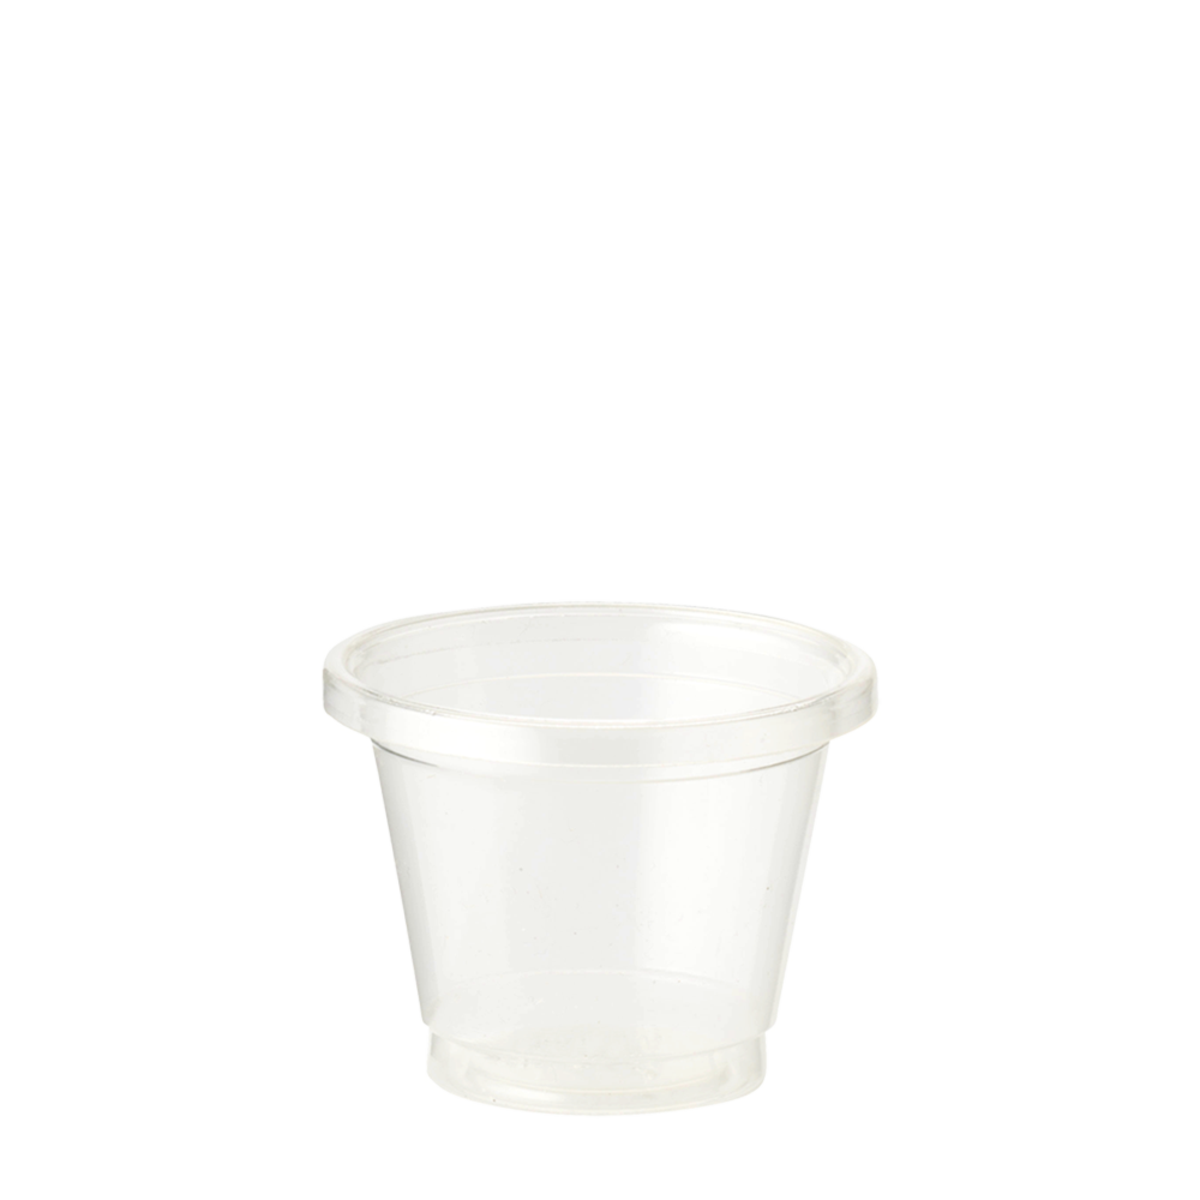 4oz Compostable Portion Cups with Lids, Disposable Souffle Take